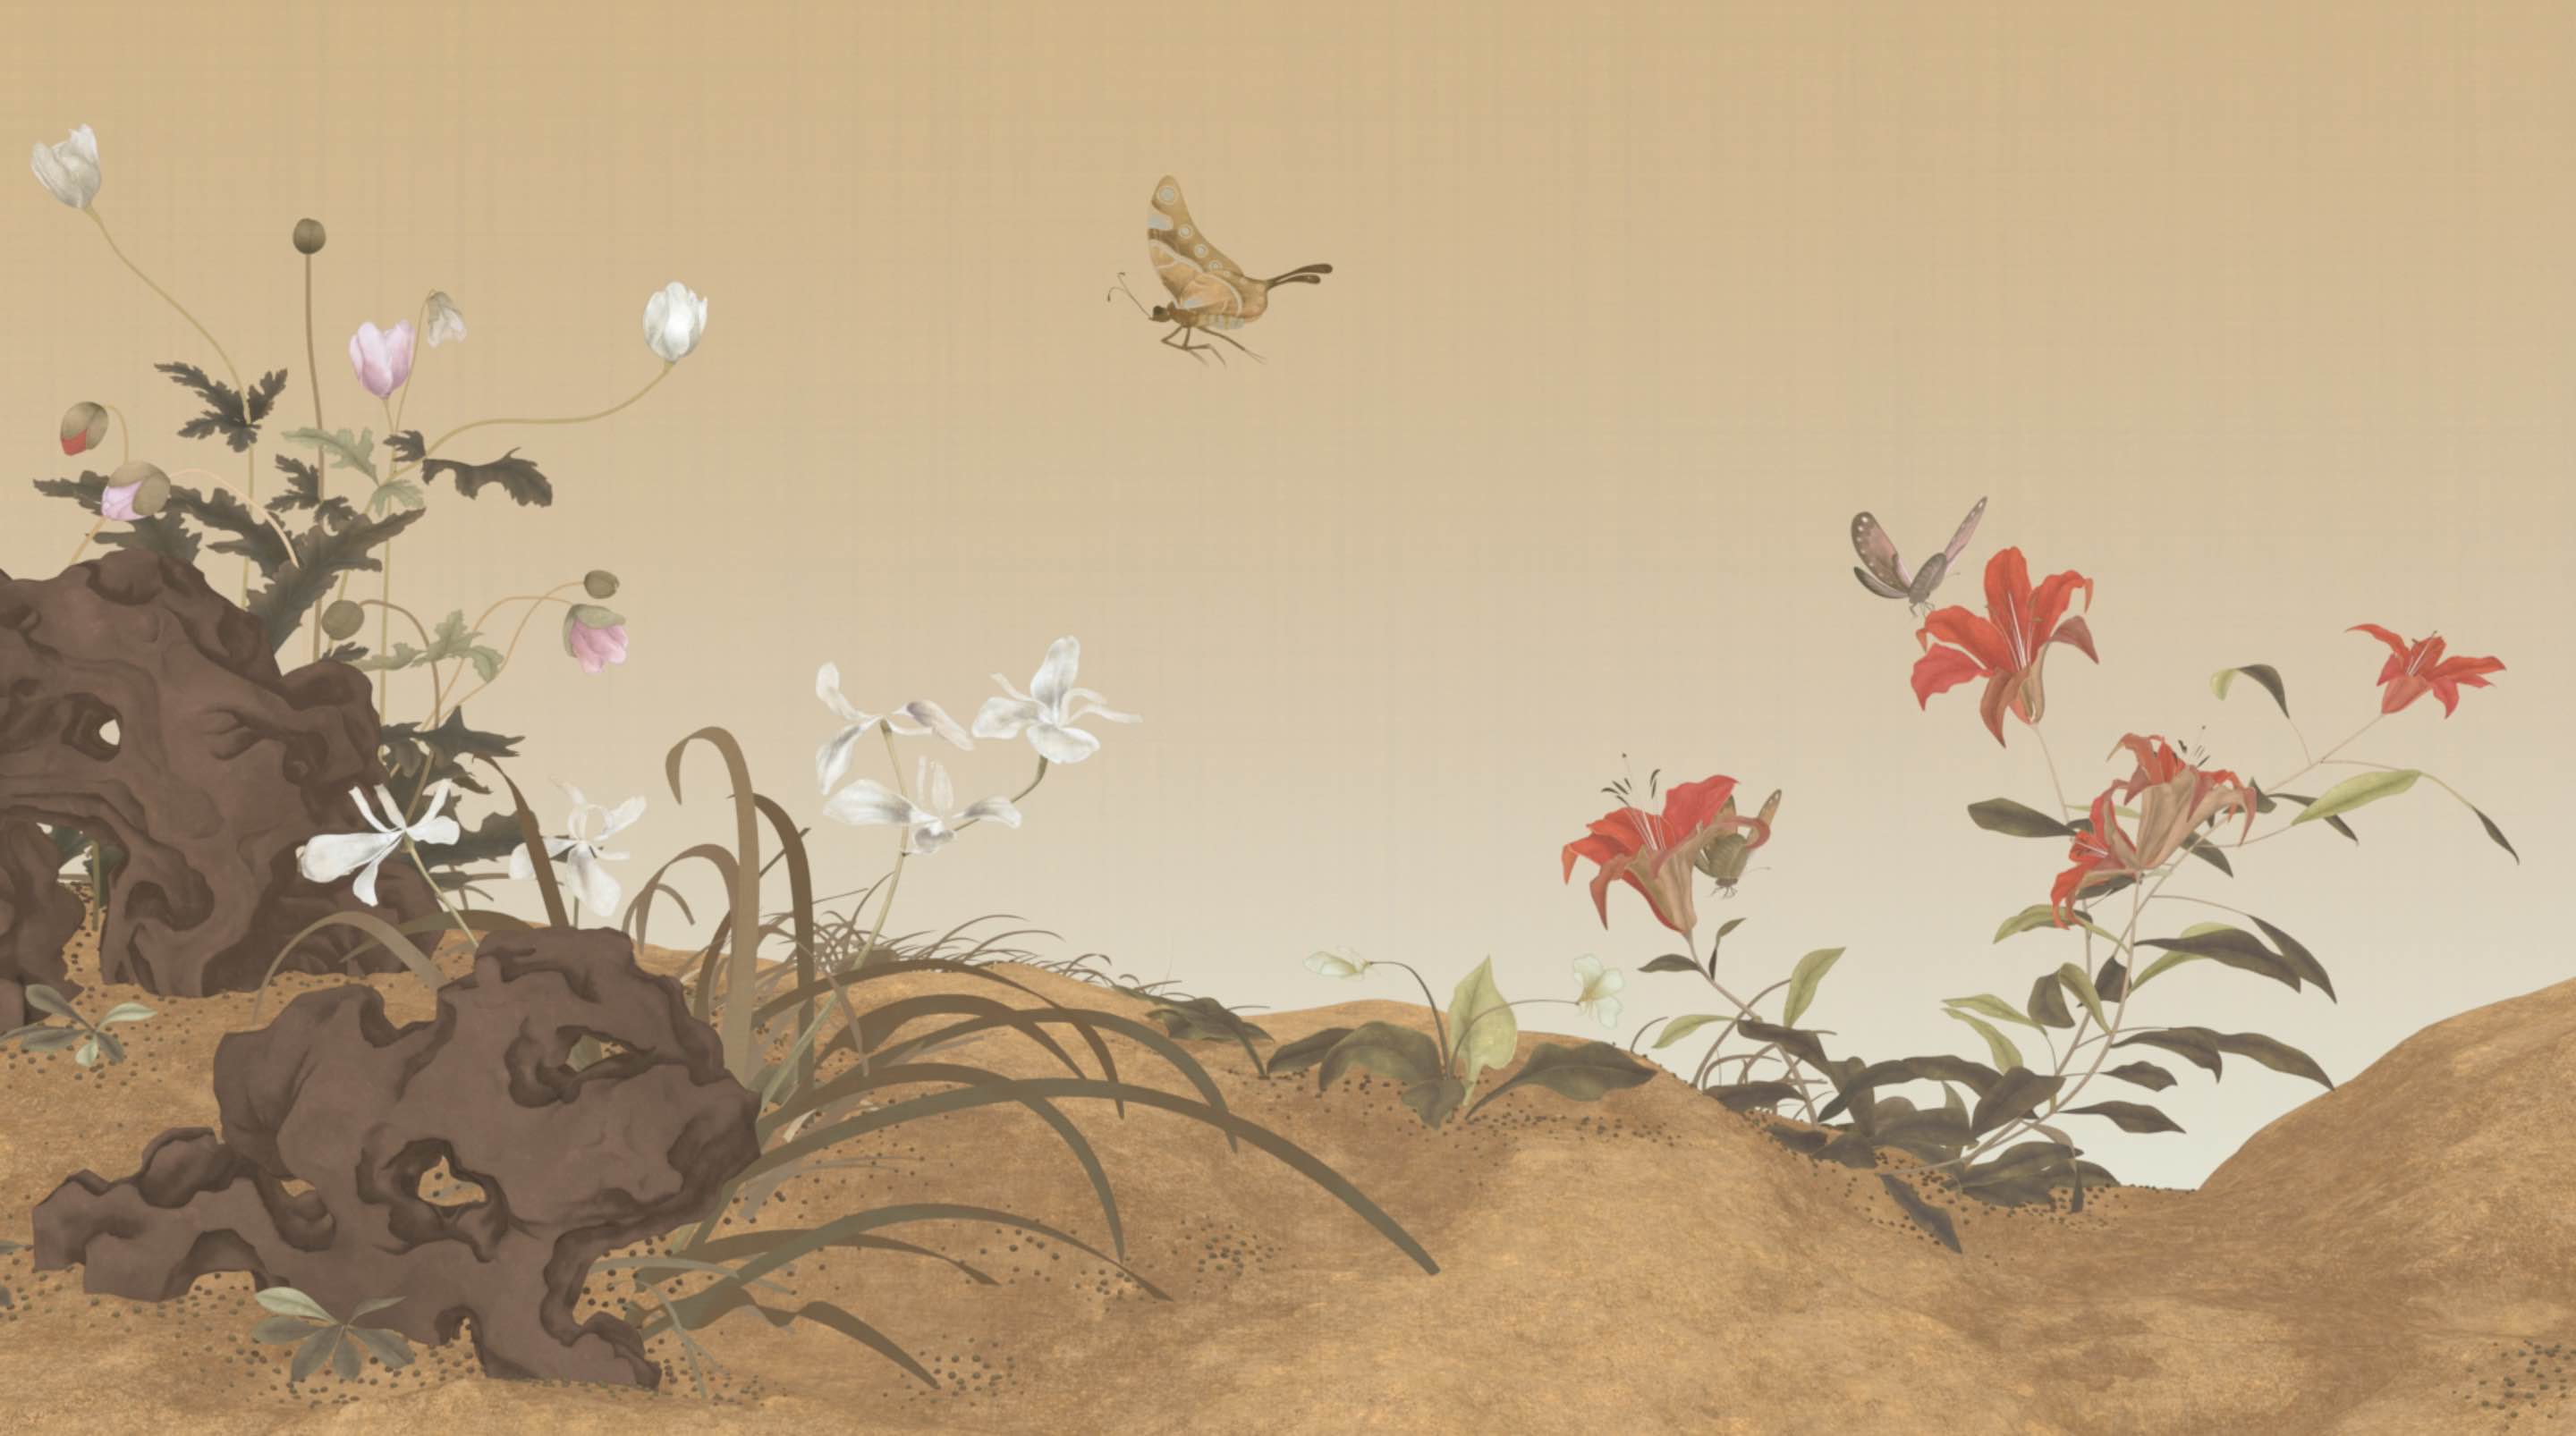 The 3D animated recreation of a Song Dynasty full-length floral scroll vividly captures the subtle shifts of the four seasons and the natural laws of Yin and Yang, all within the digital realm. Amidst the blossoms, bees buzz and butterflies dance, creating an immersive experience where the scent of the flowers seems to fill the air. /CGTN